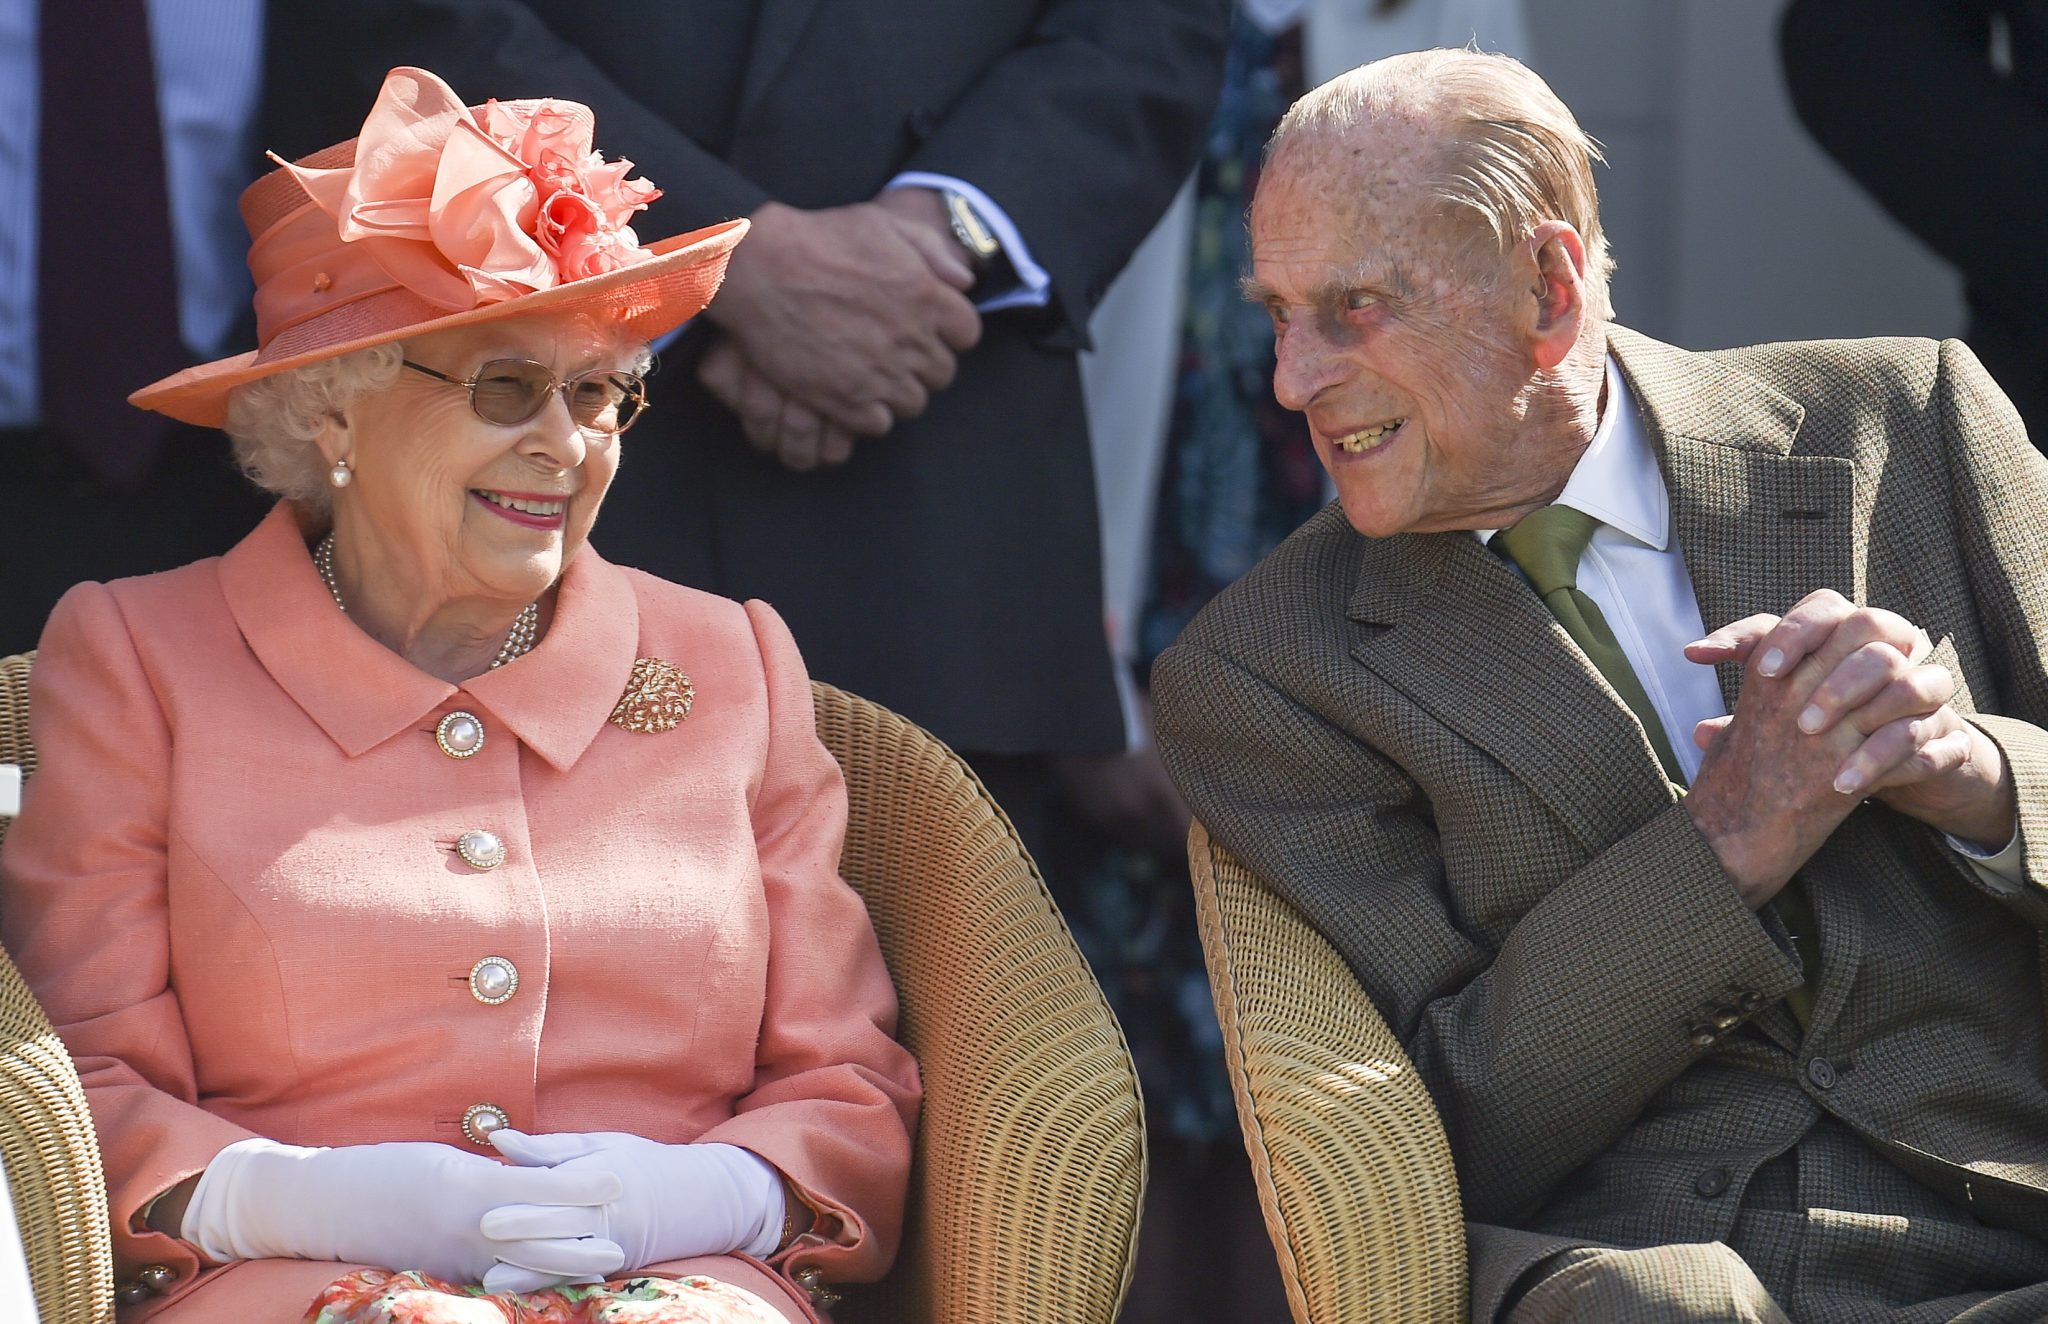 The Queen and Prince Phillip at the Royal Windsor Cup polo match in 2018